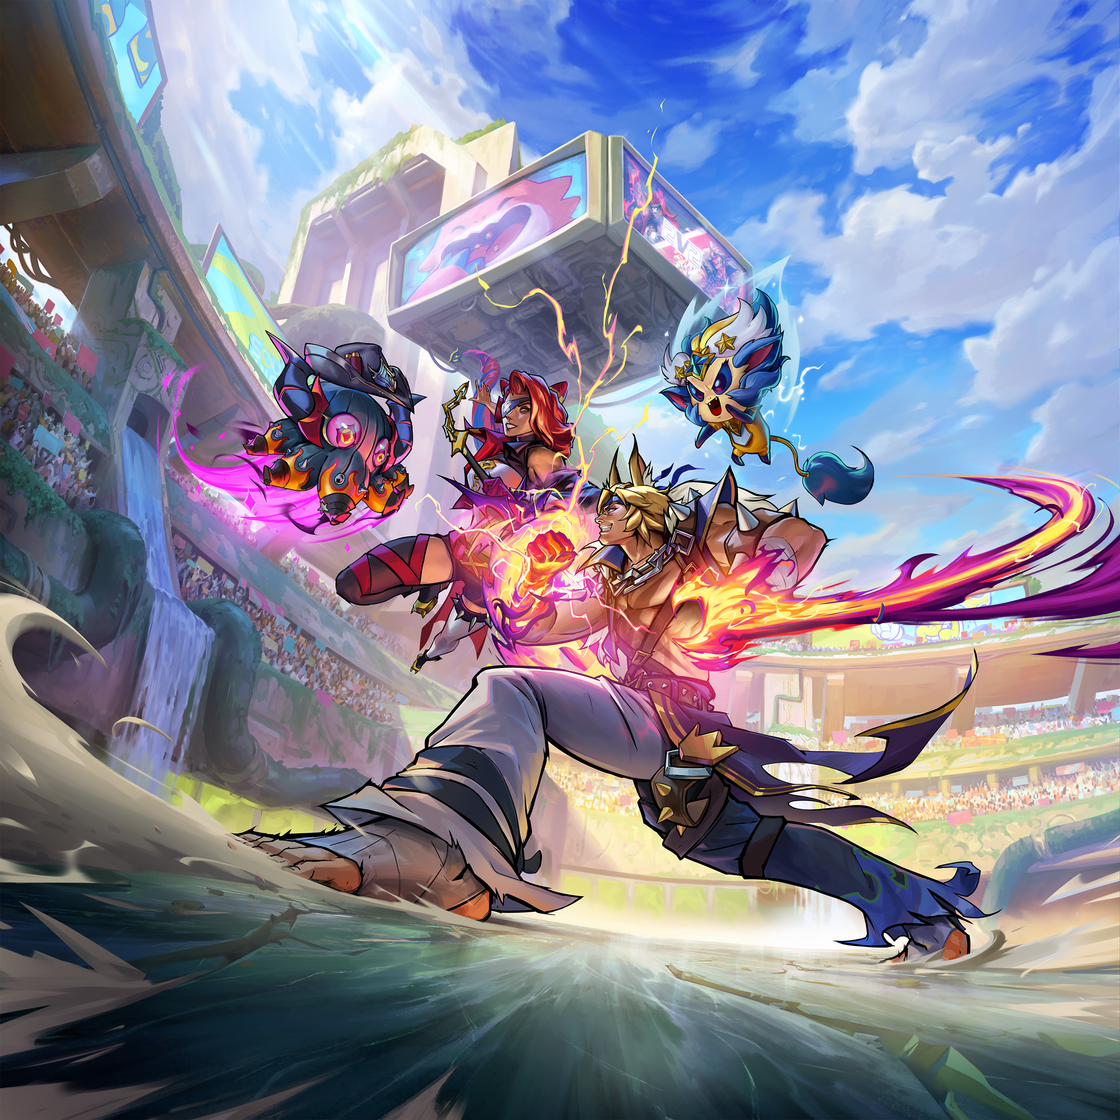 TFT: Fortune's Favor and Lunar Gala Overview - League of Legends